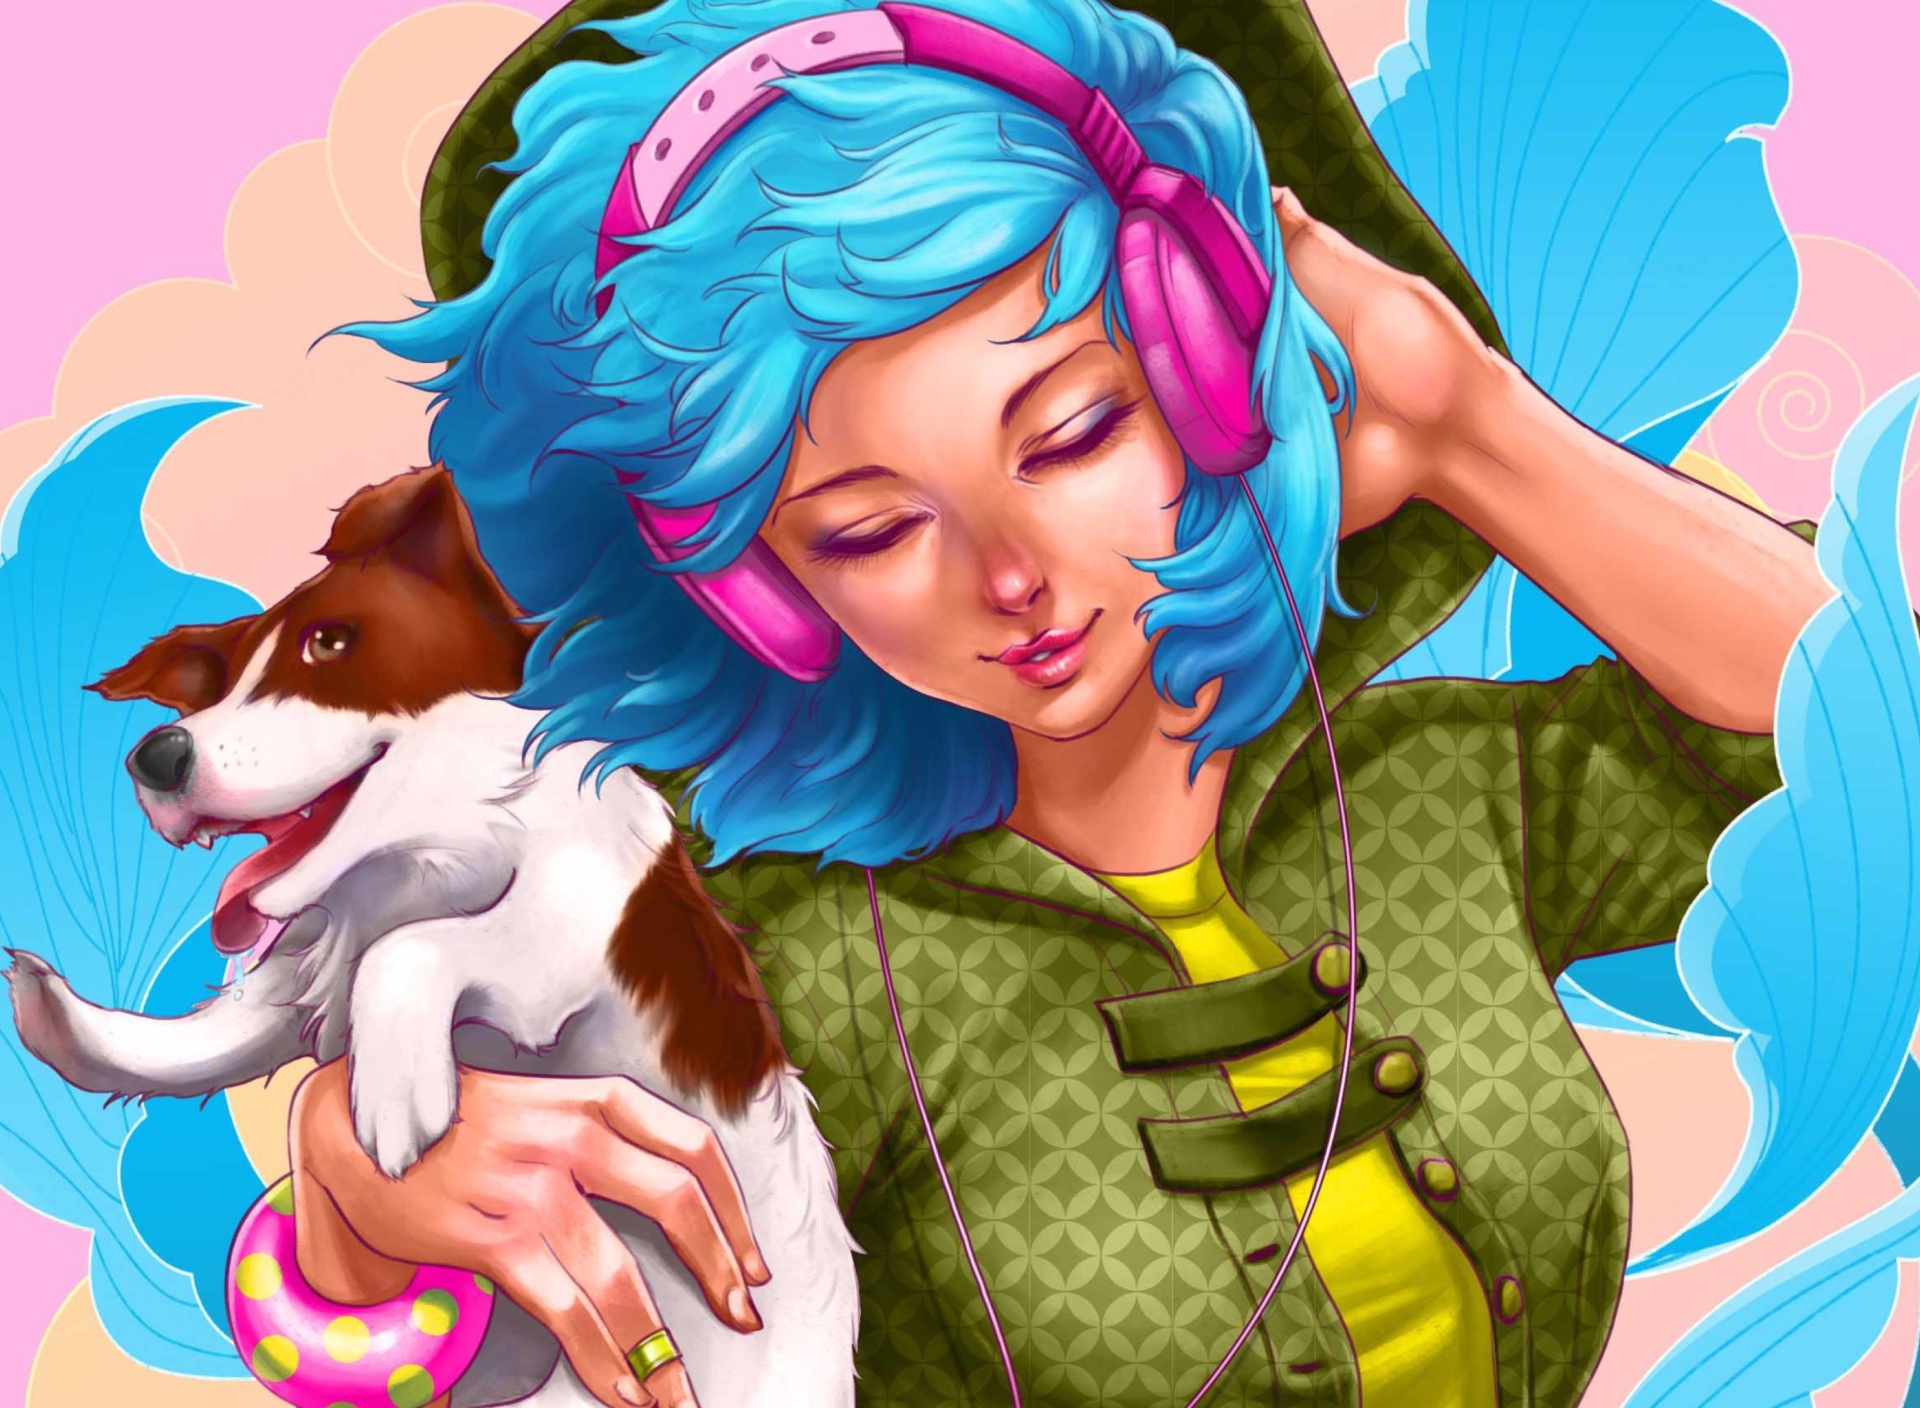 Girl With Blue Hair And Pink Headphones Drawing screenshot #1 1920x1408